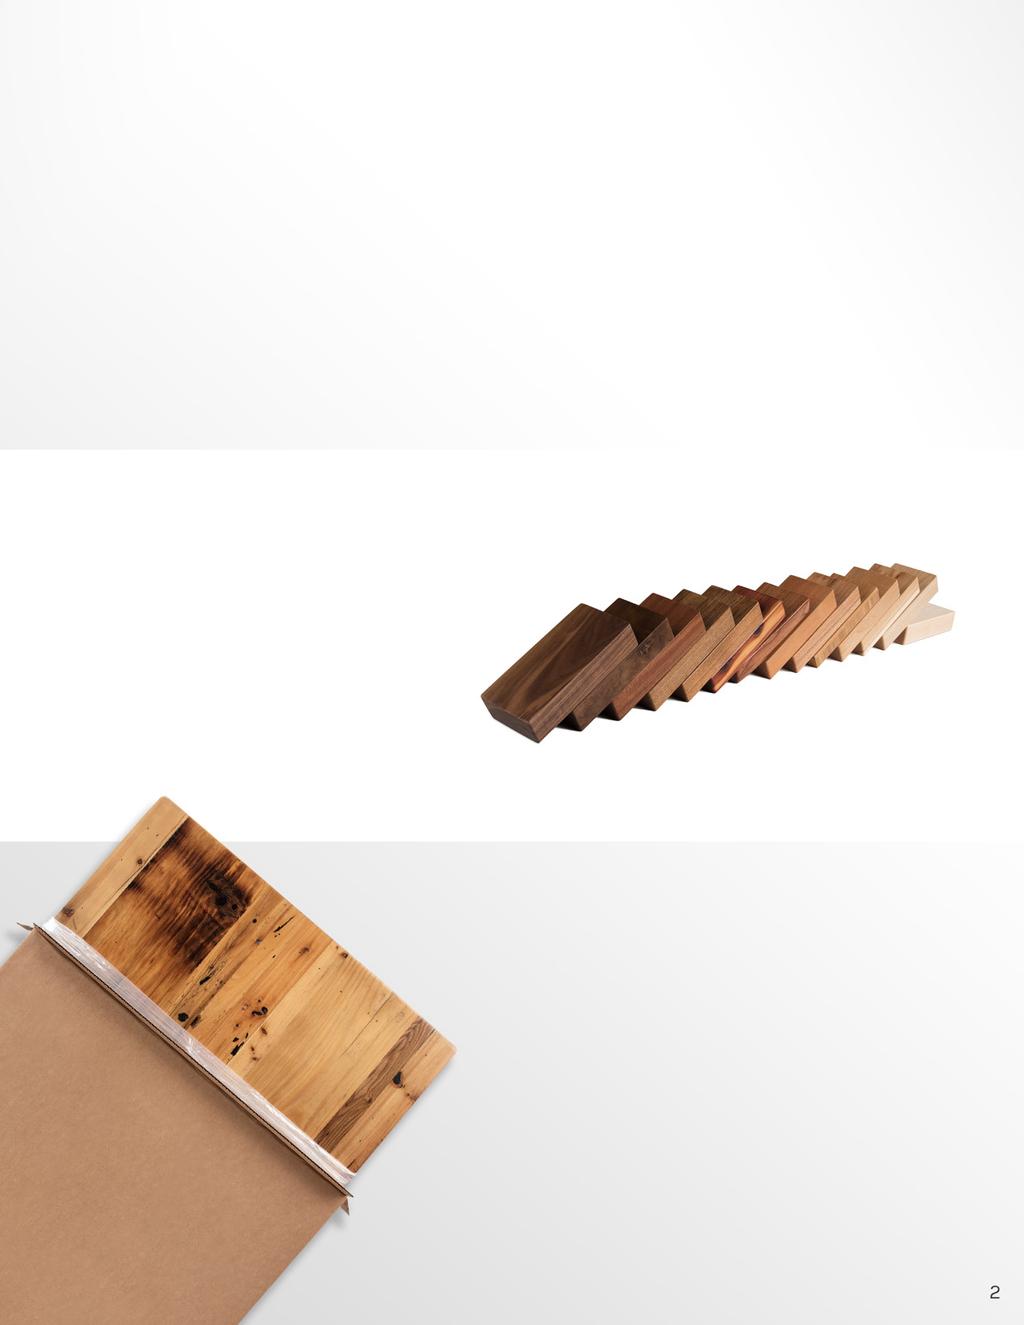 Overview Between our five categories of desktop materials (Laminate, Eco, Bamboo, Rubberwood, Reclaimed Wood, and Solid Wood), the many standard and custom sizes we offer, and our grommet options, we